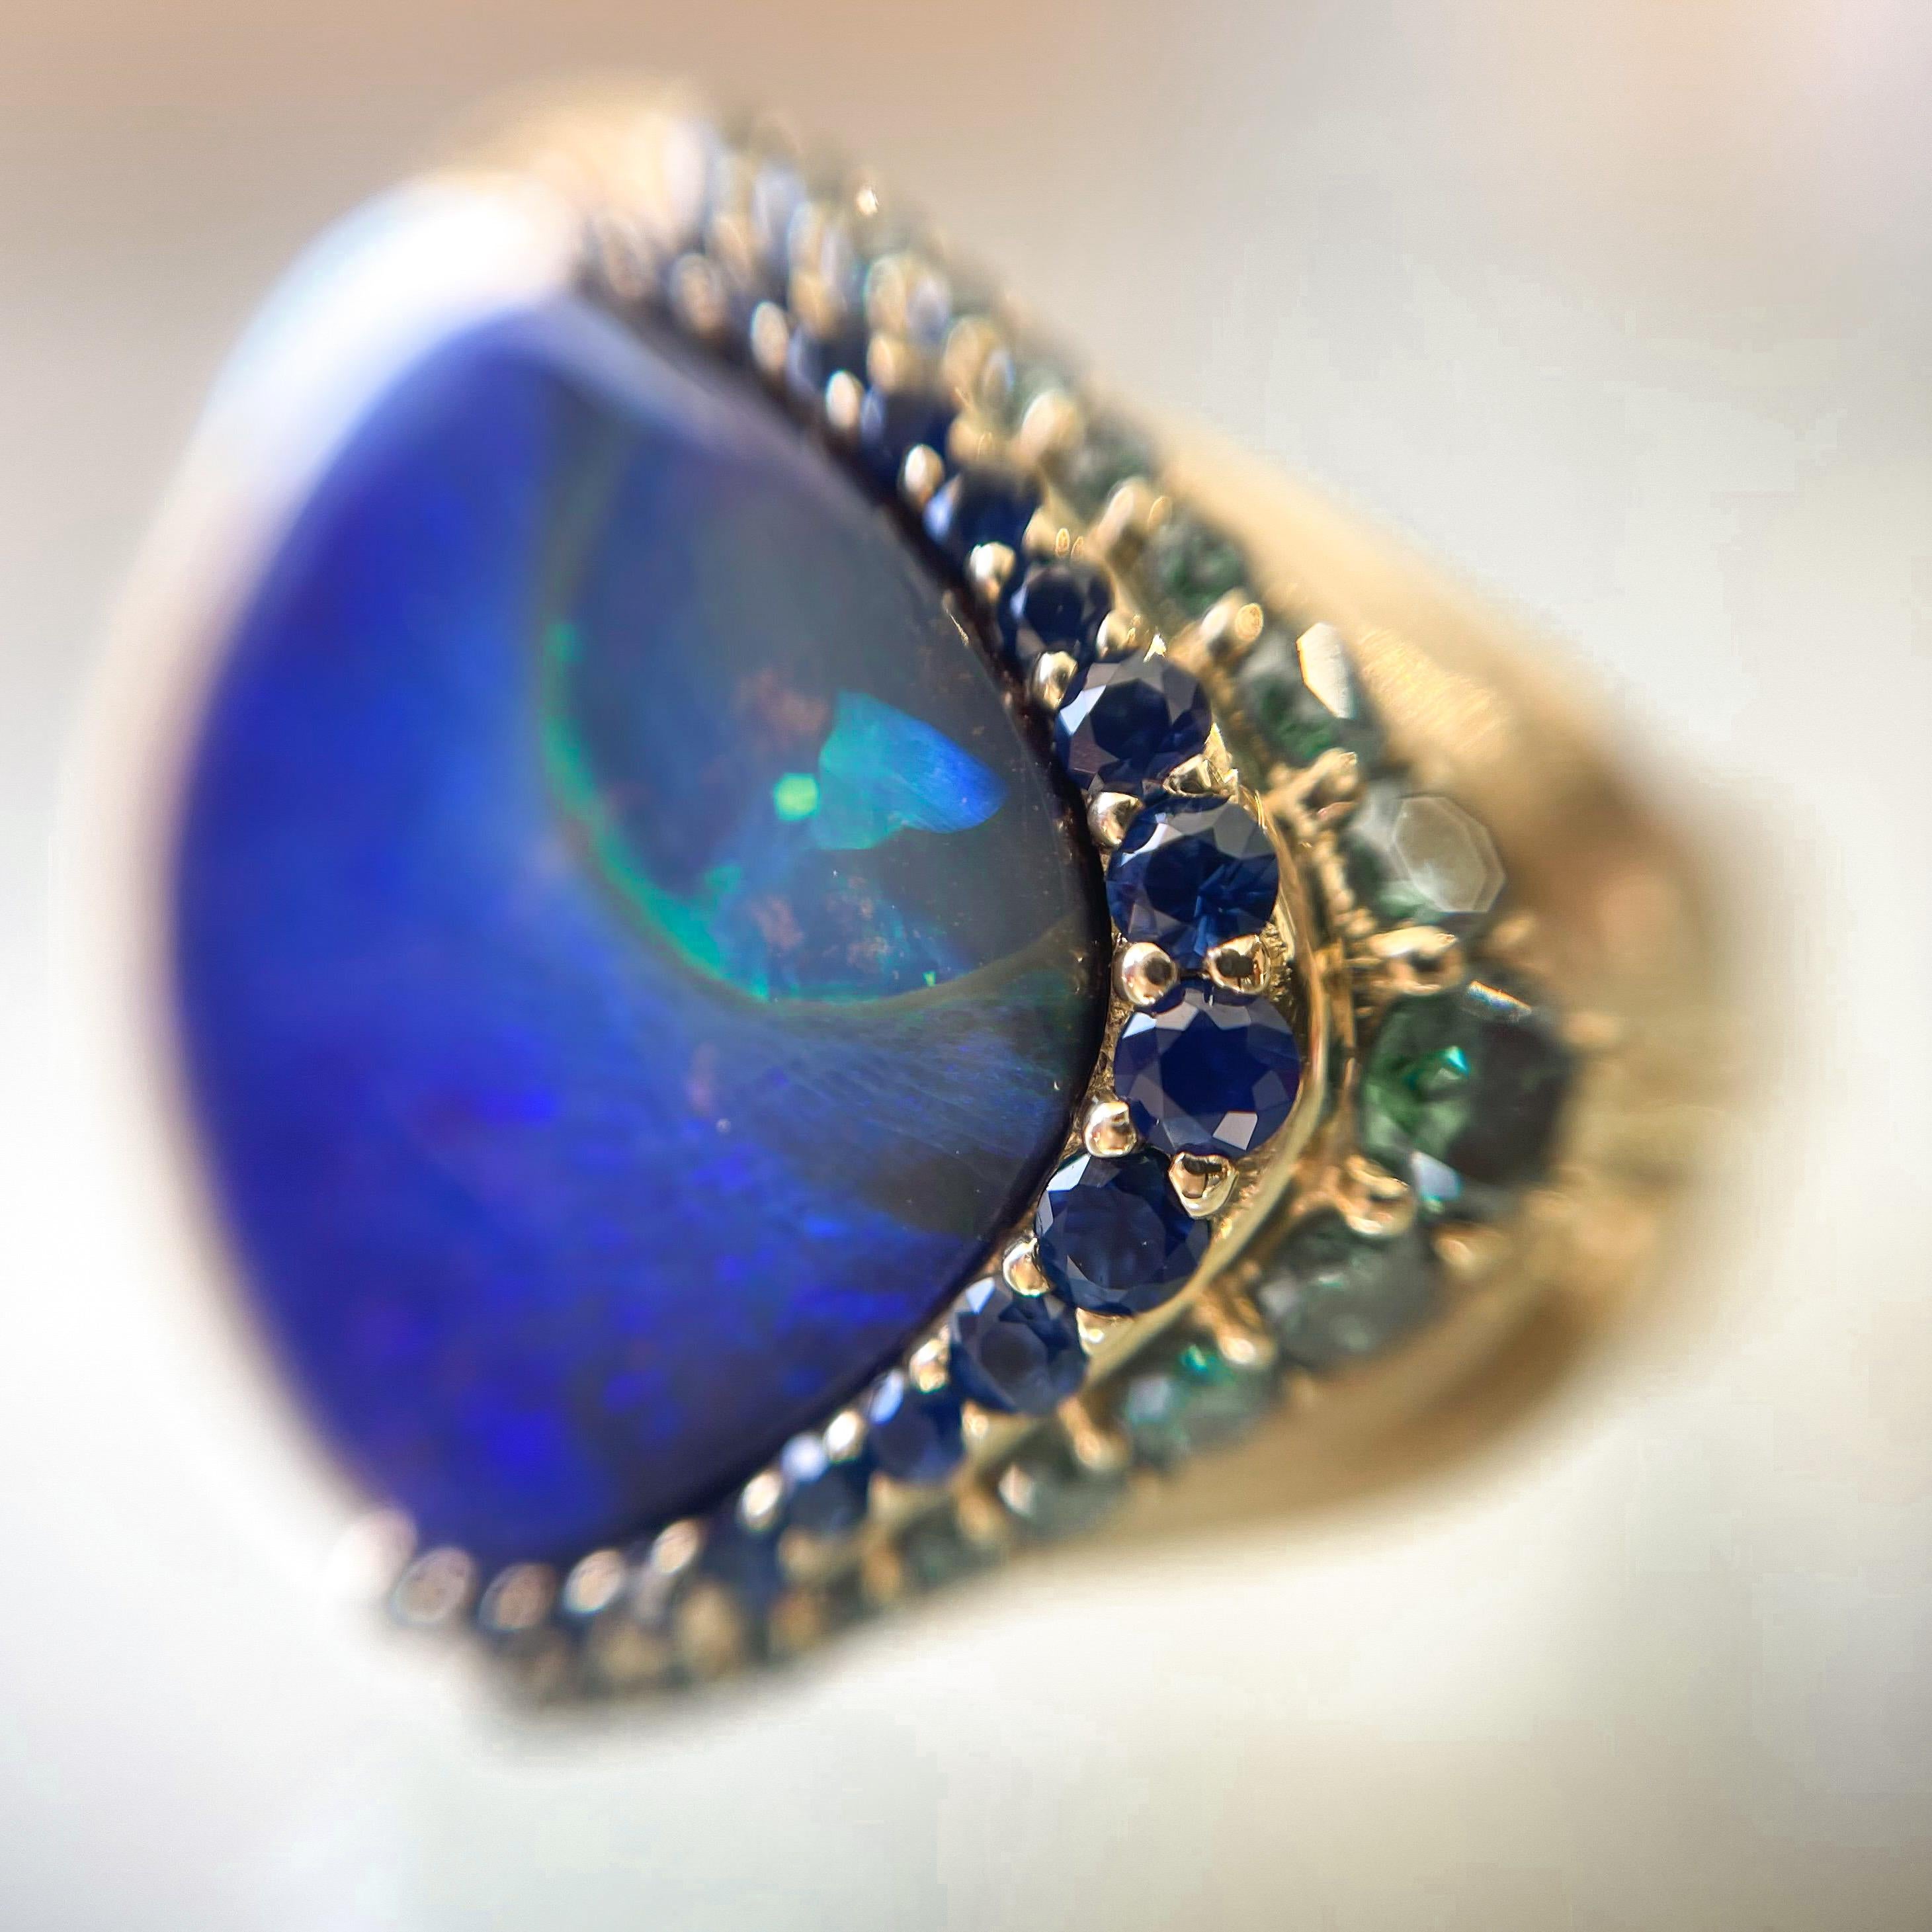 Plume Australian Opal Ring in Gold with Sapphires and Diamonds by NIXIN Jewelry For Sale 2